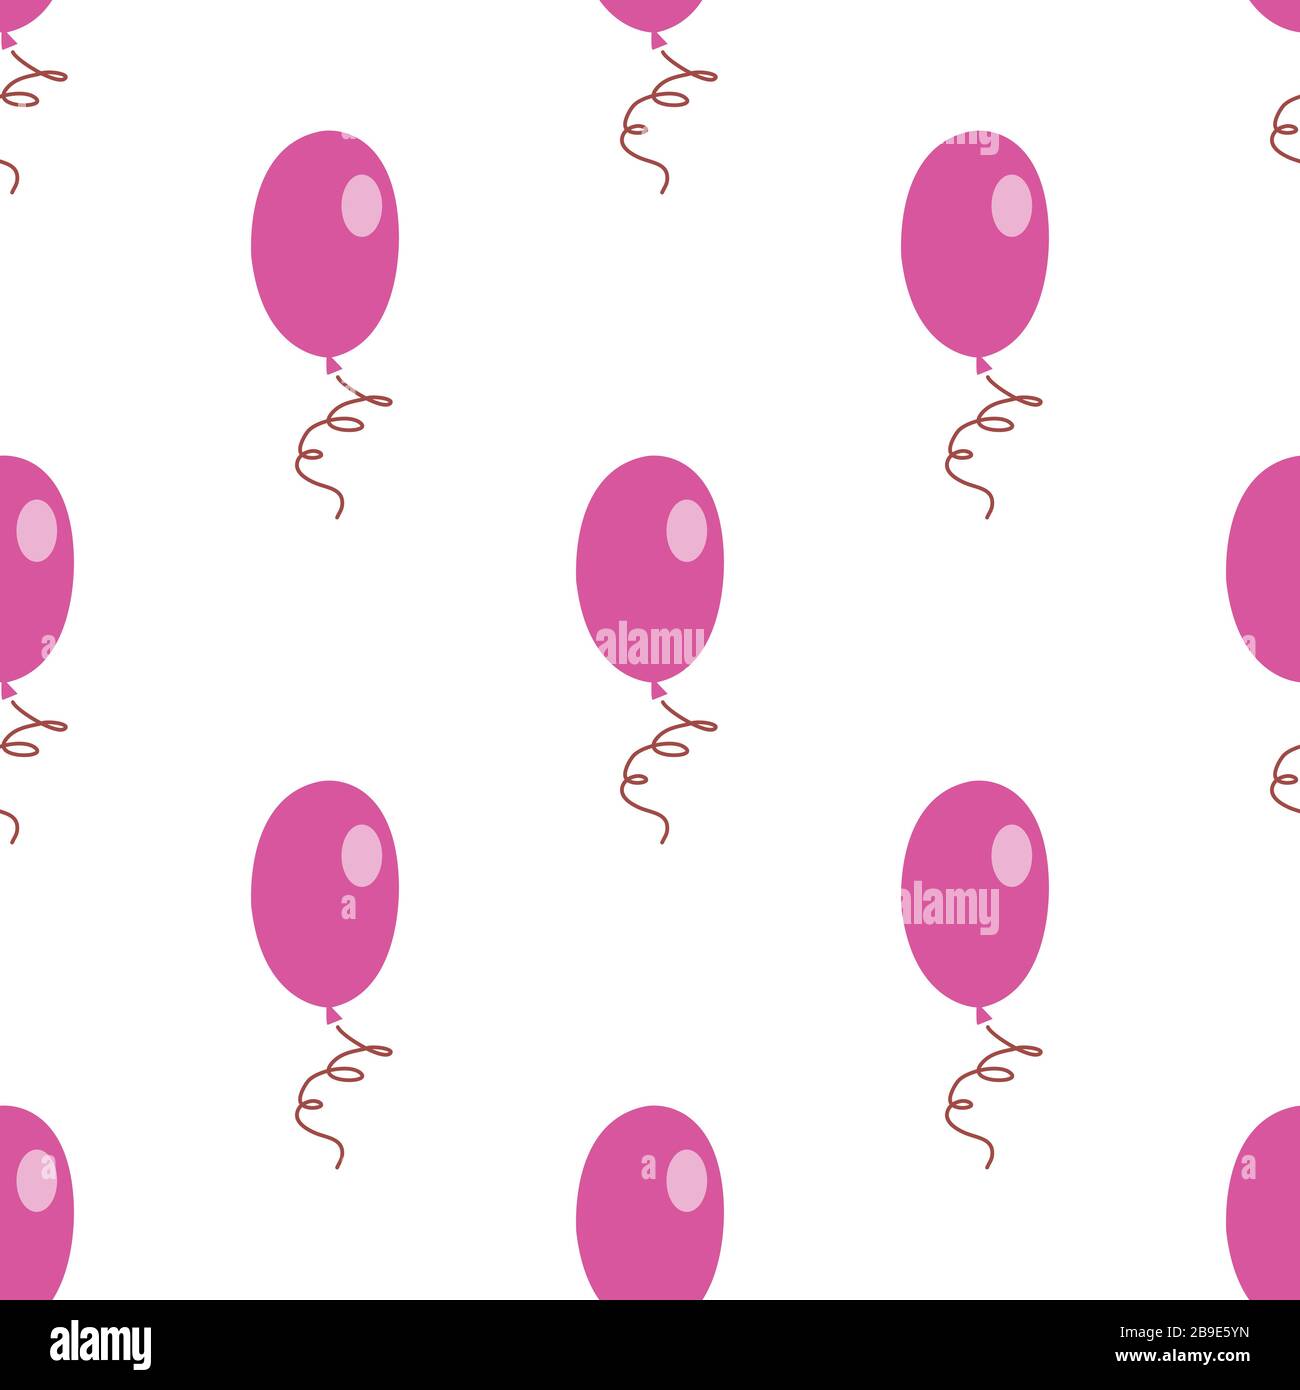 Pink white air balloons seamless pattern Stock Vector